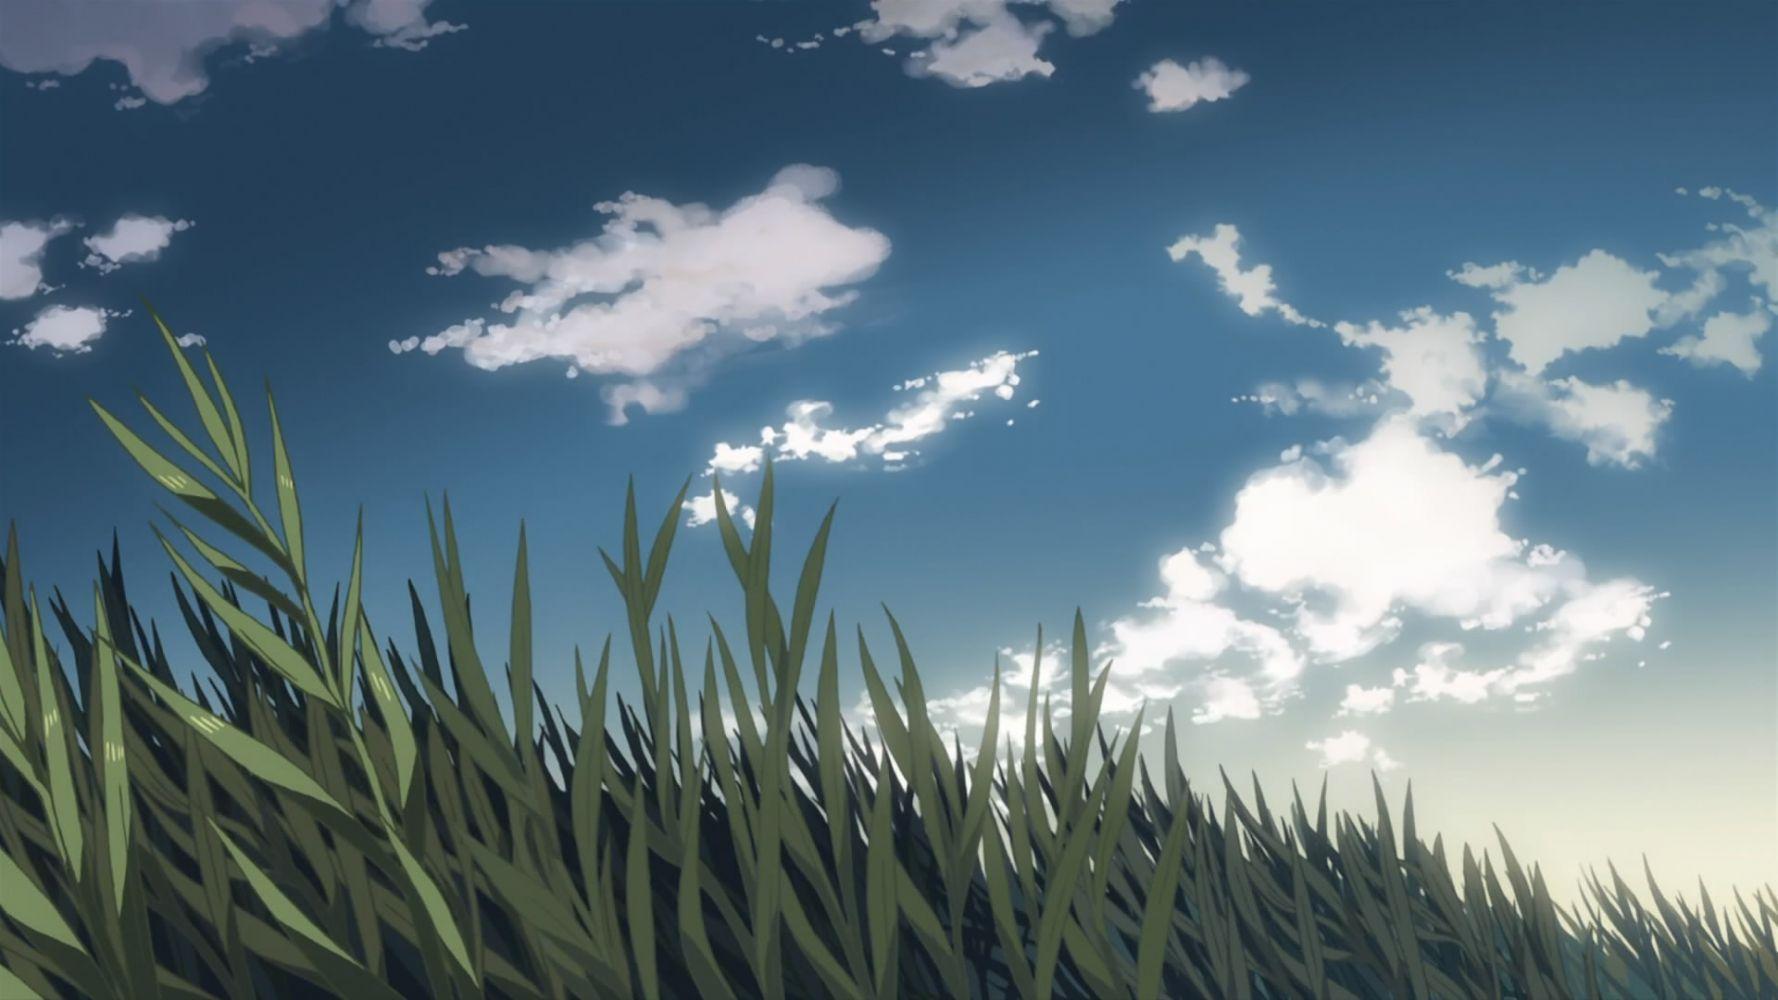 Details 73+ anime grass background best - awesomeenglish.edu.vn